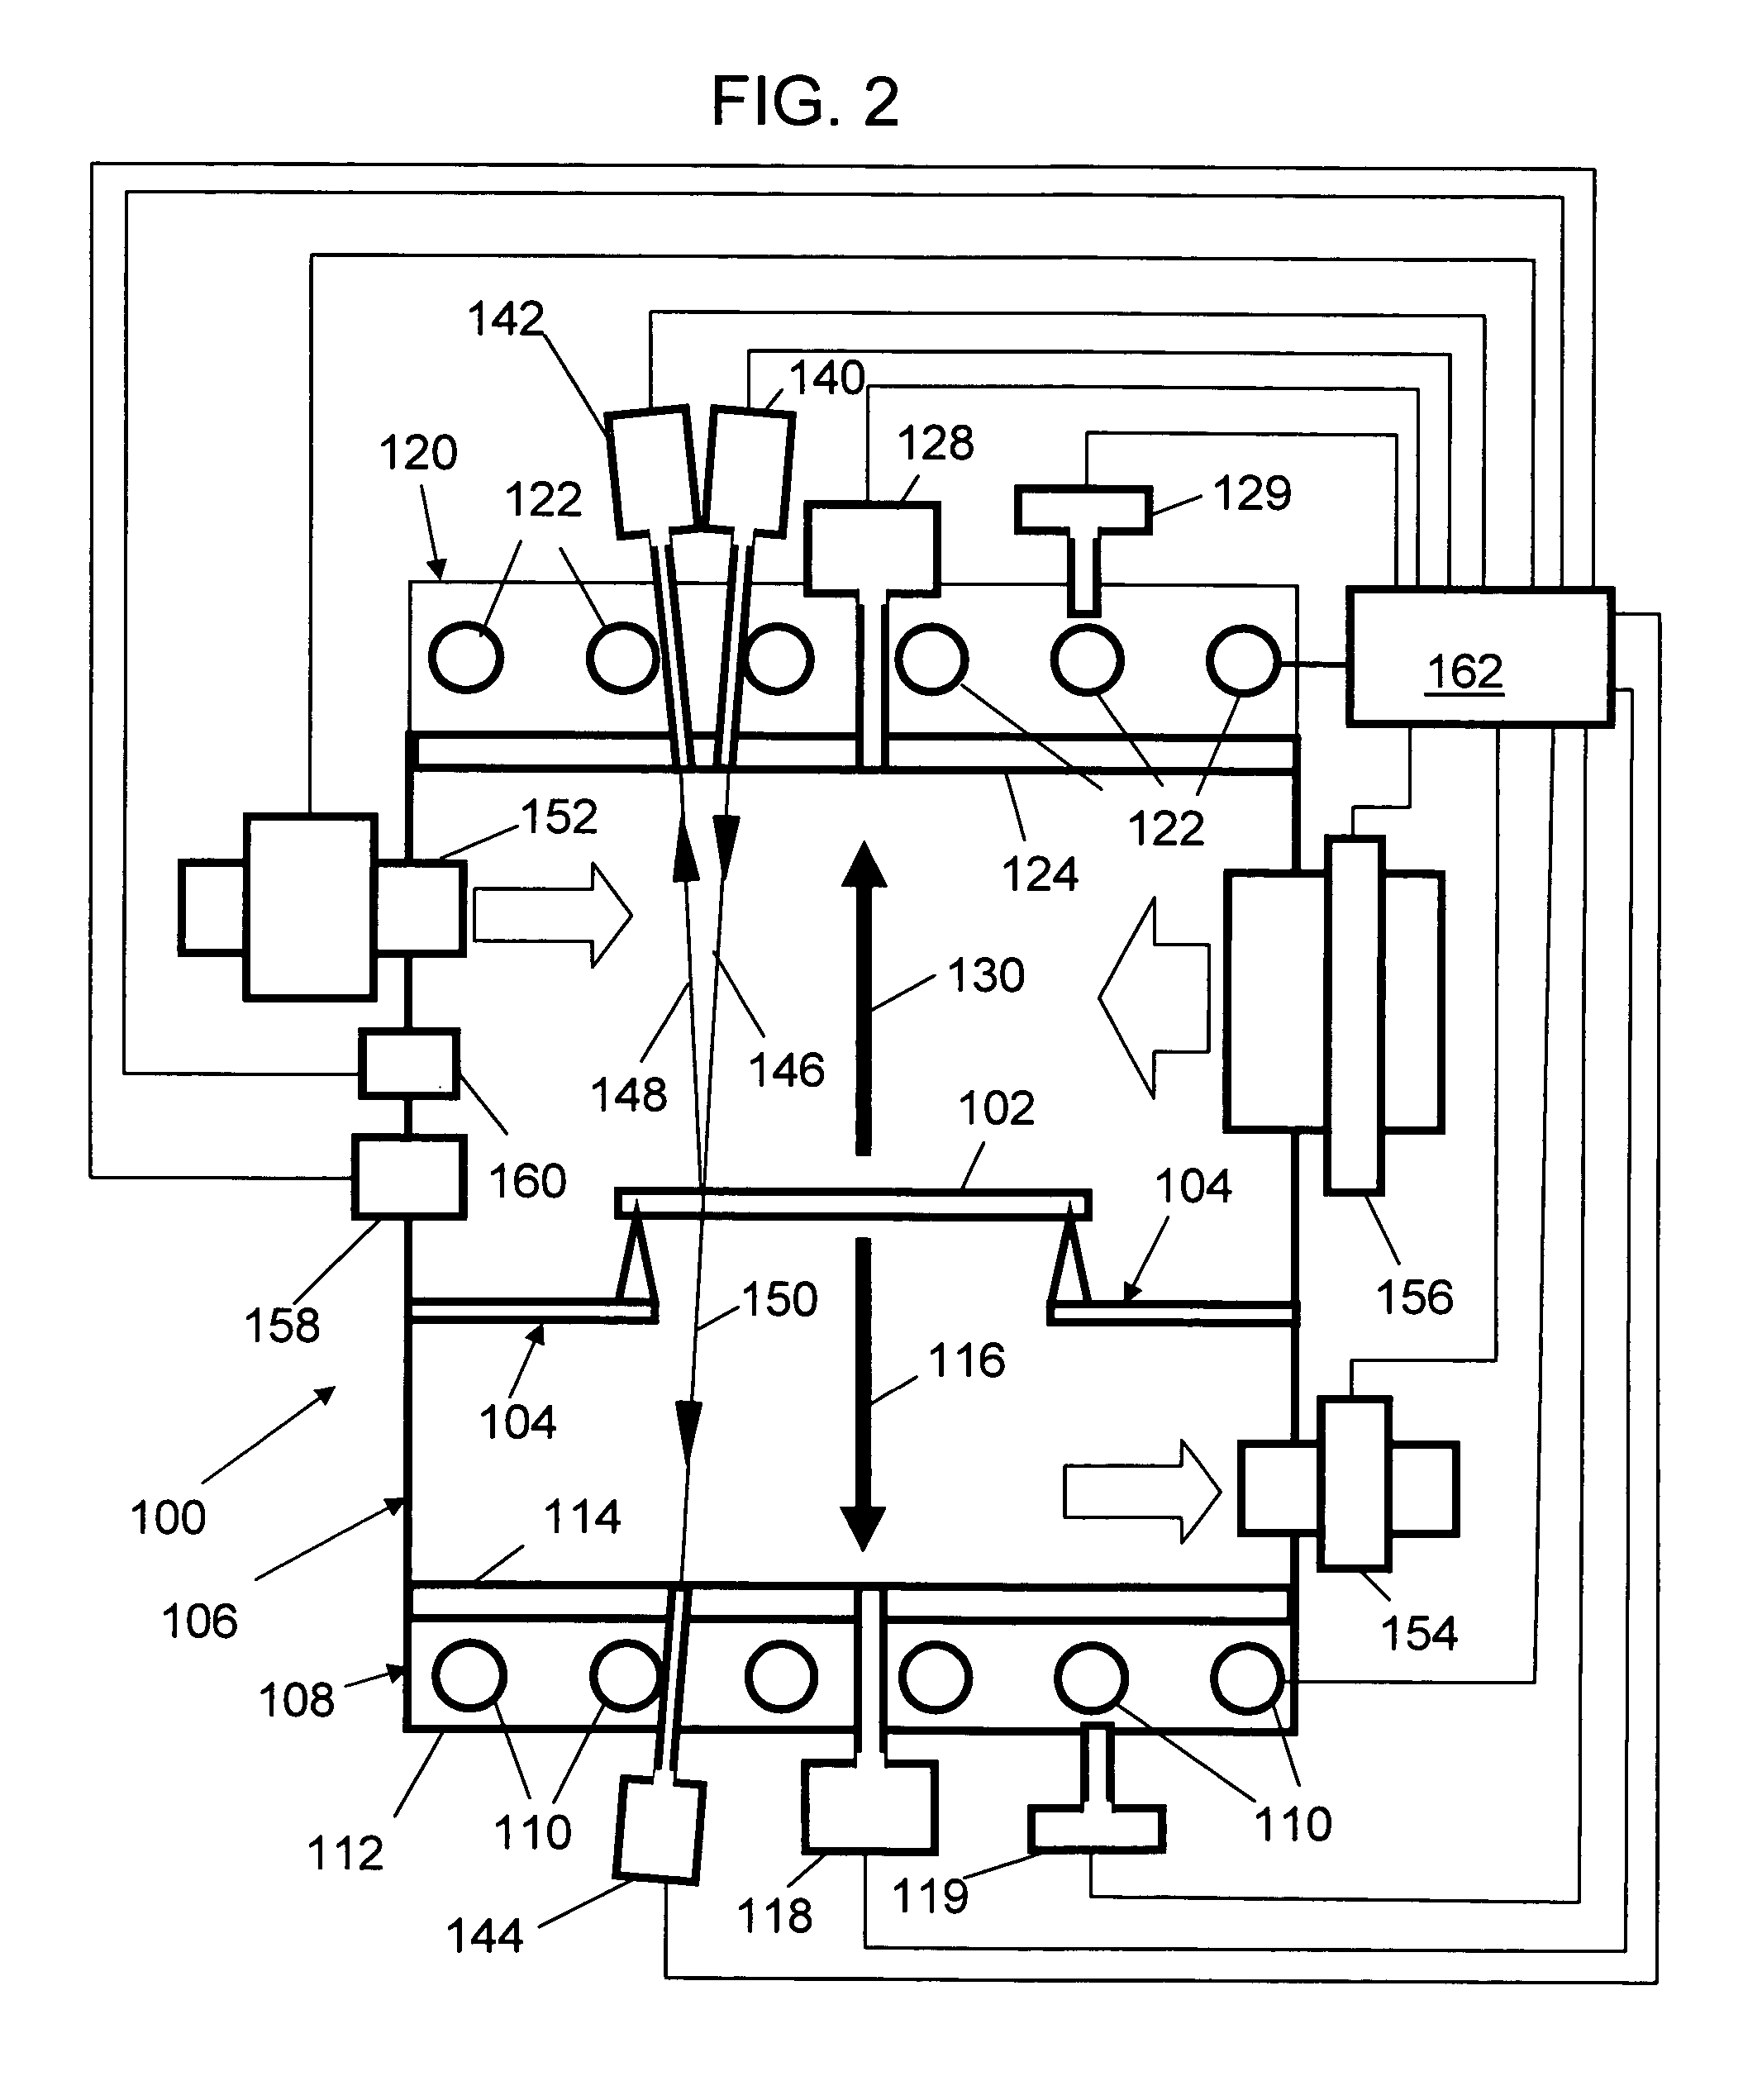 Rapid thermal processing using energy transfer layers